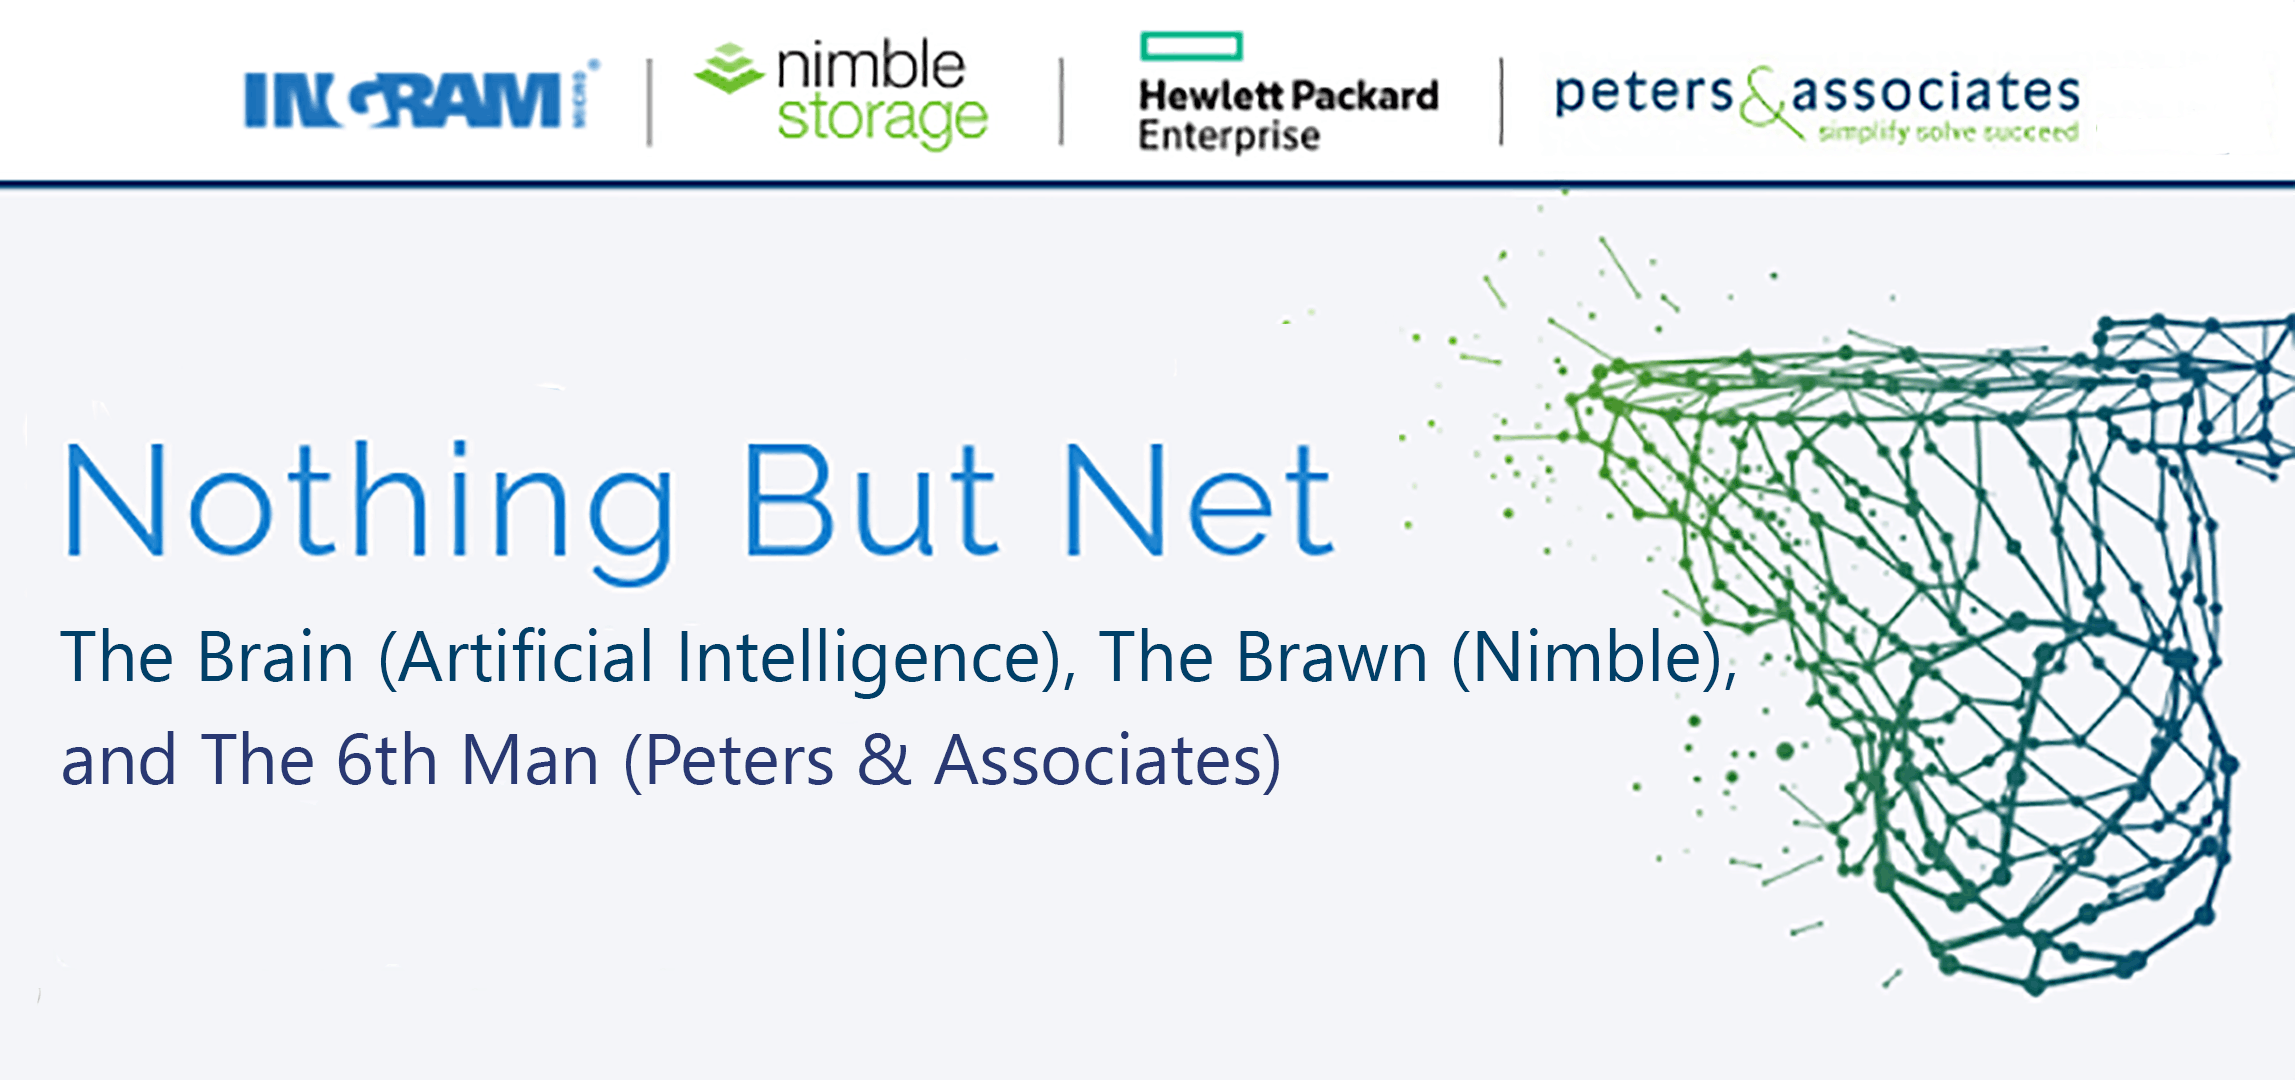 Nothing But Net: The Brain (AI), The Brawn (Nimble) and The 6th Man (Peters)